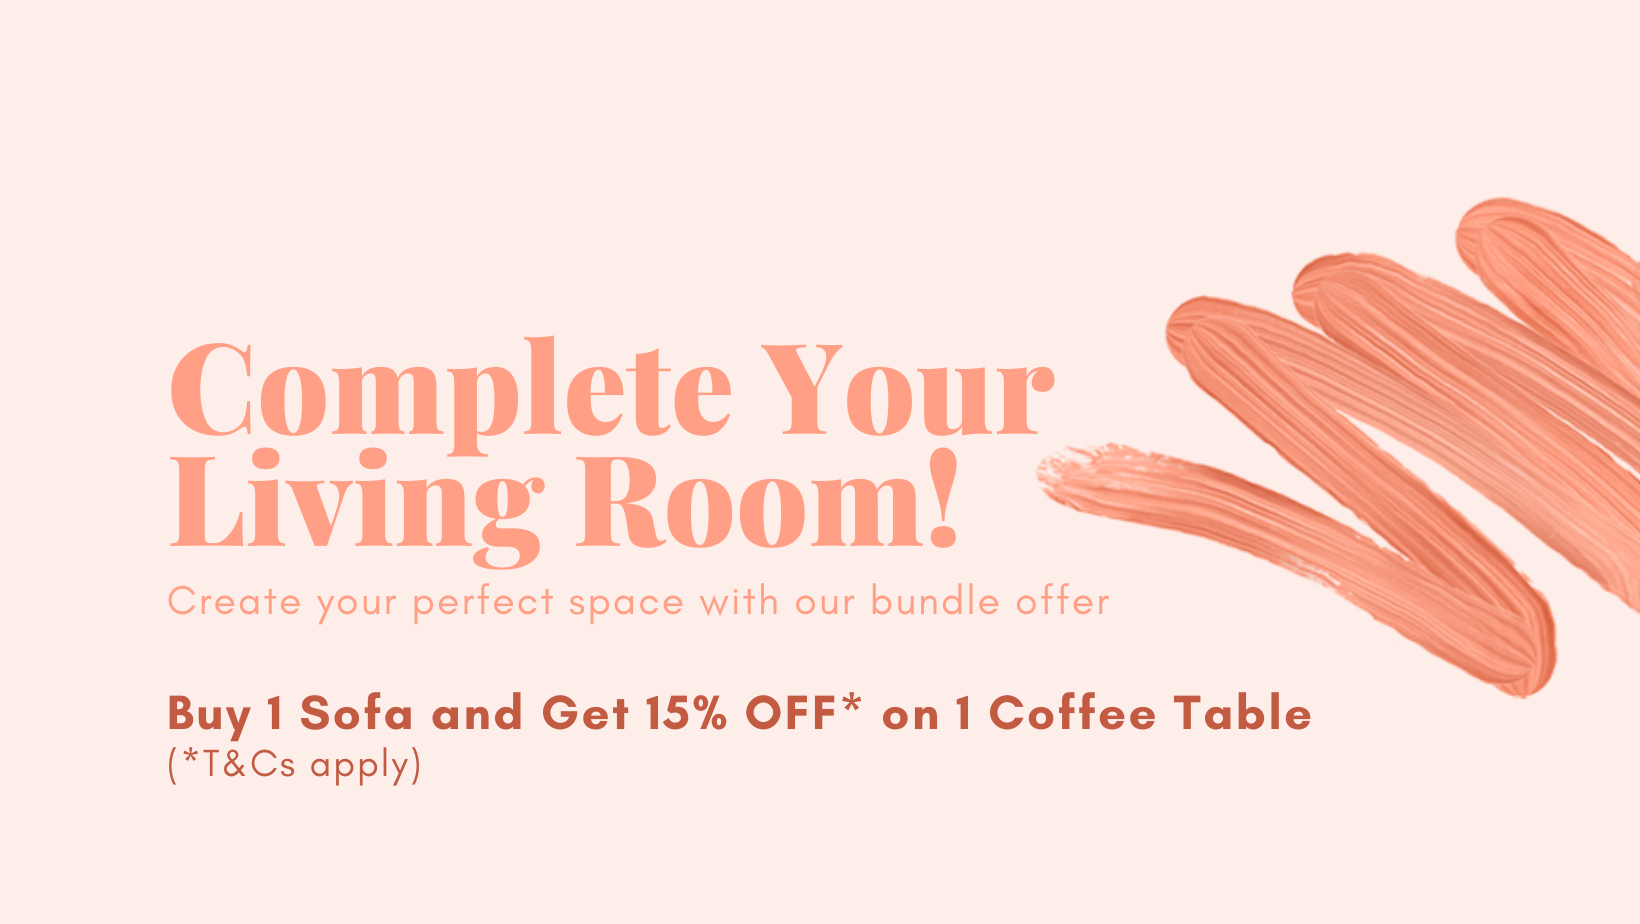 Complete Your Living Room! Create your perfect space with our bundle offer. Buy 1 Sofa and Get 15% OFF* on 1 Coffee Table (*T&Cs apply).